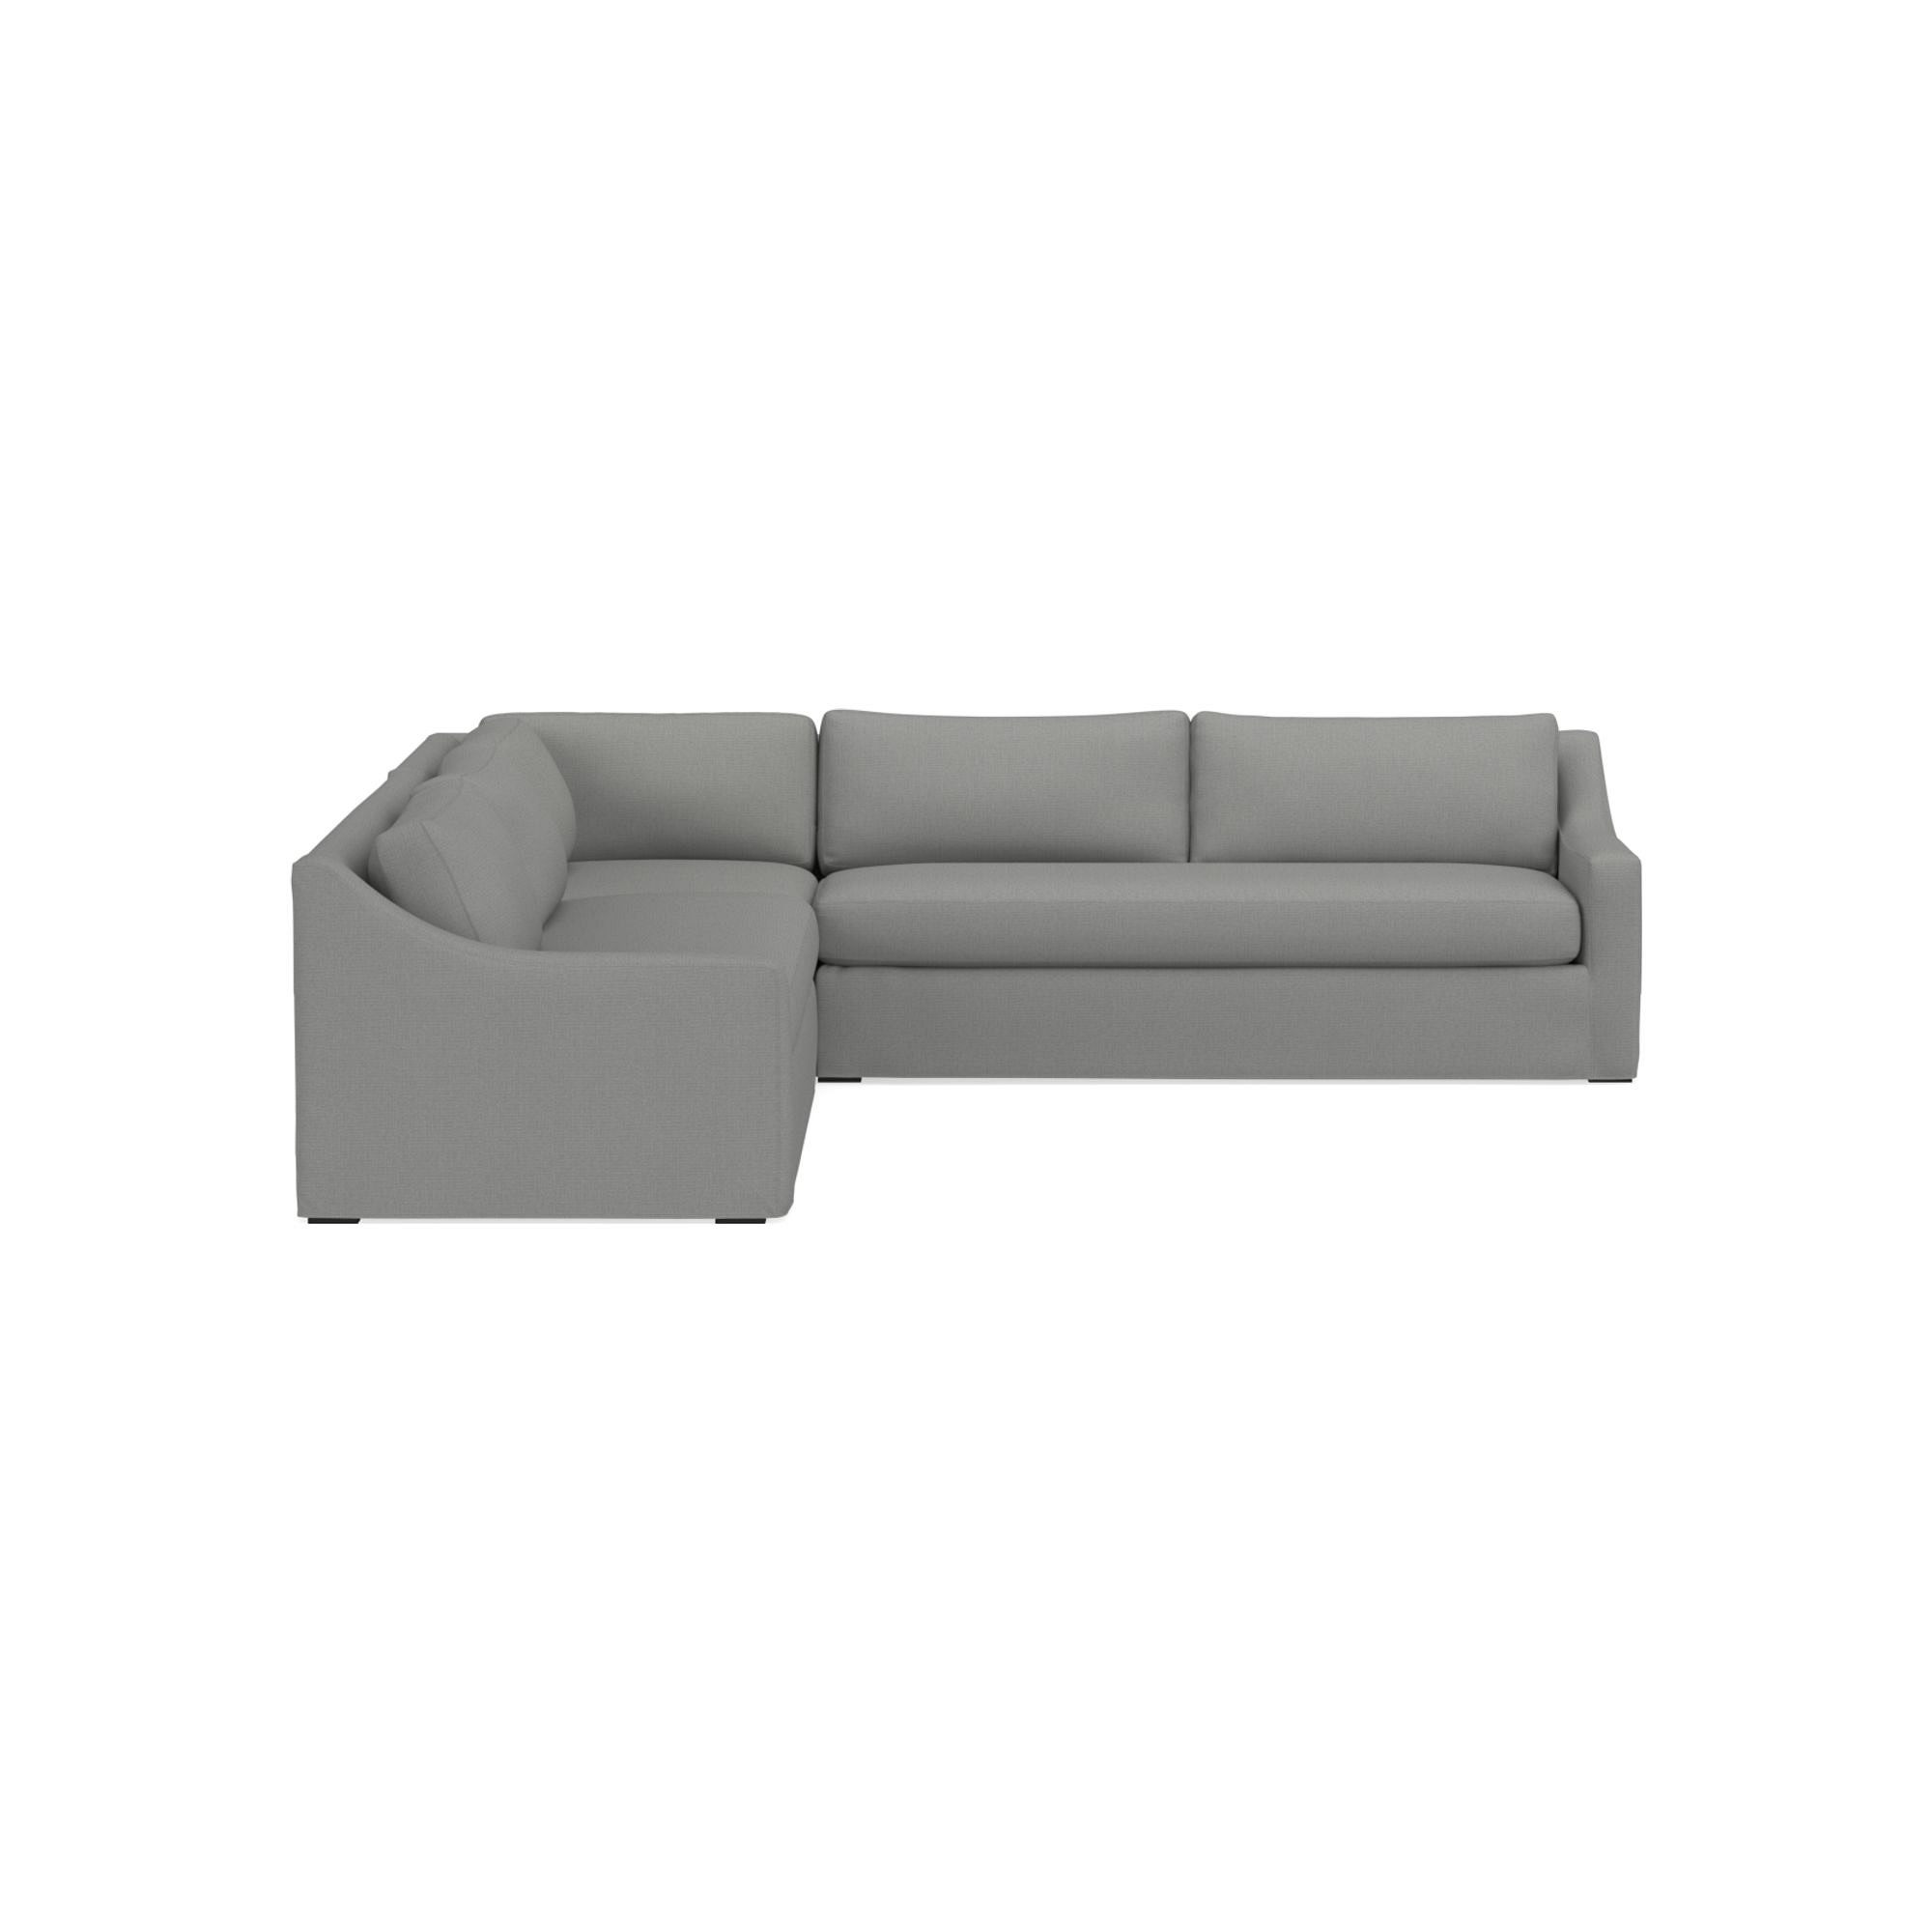 Ghent Slope Slipcovered 3-Piece L-Shaped Sofa